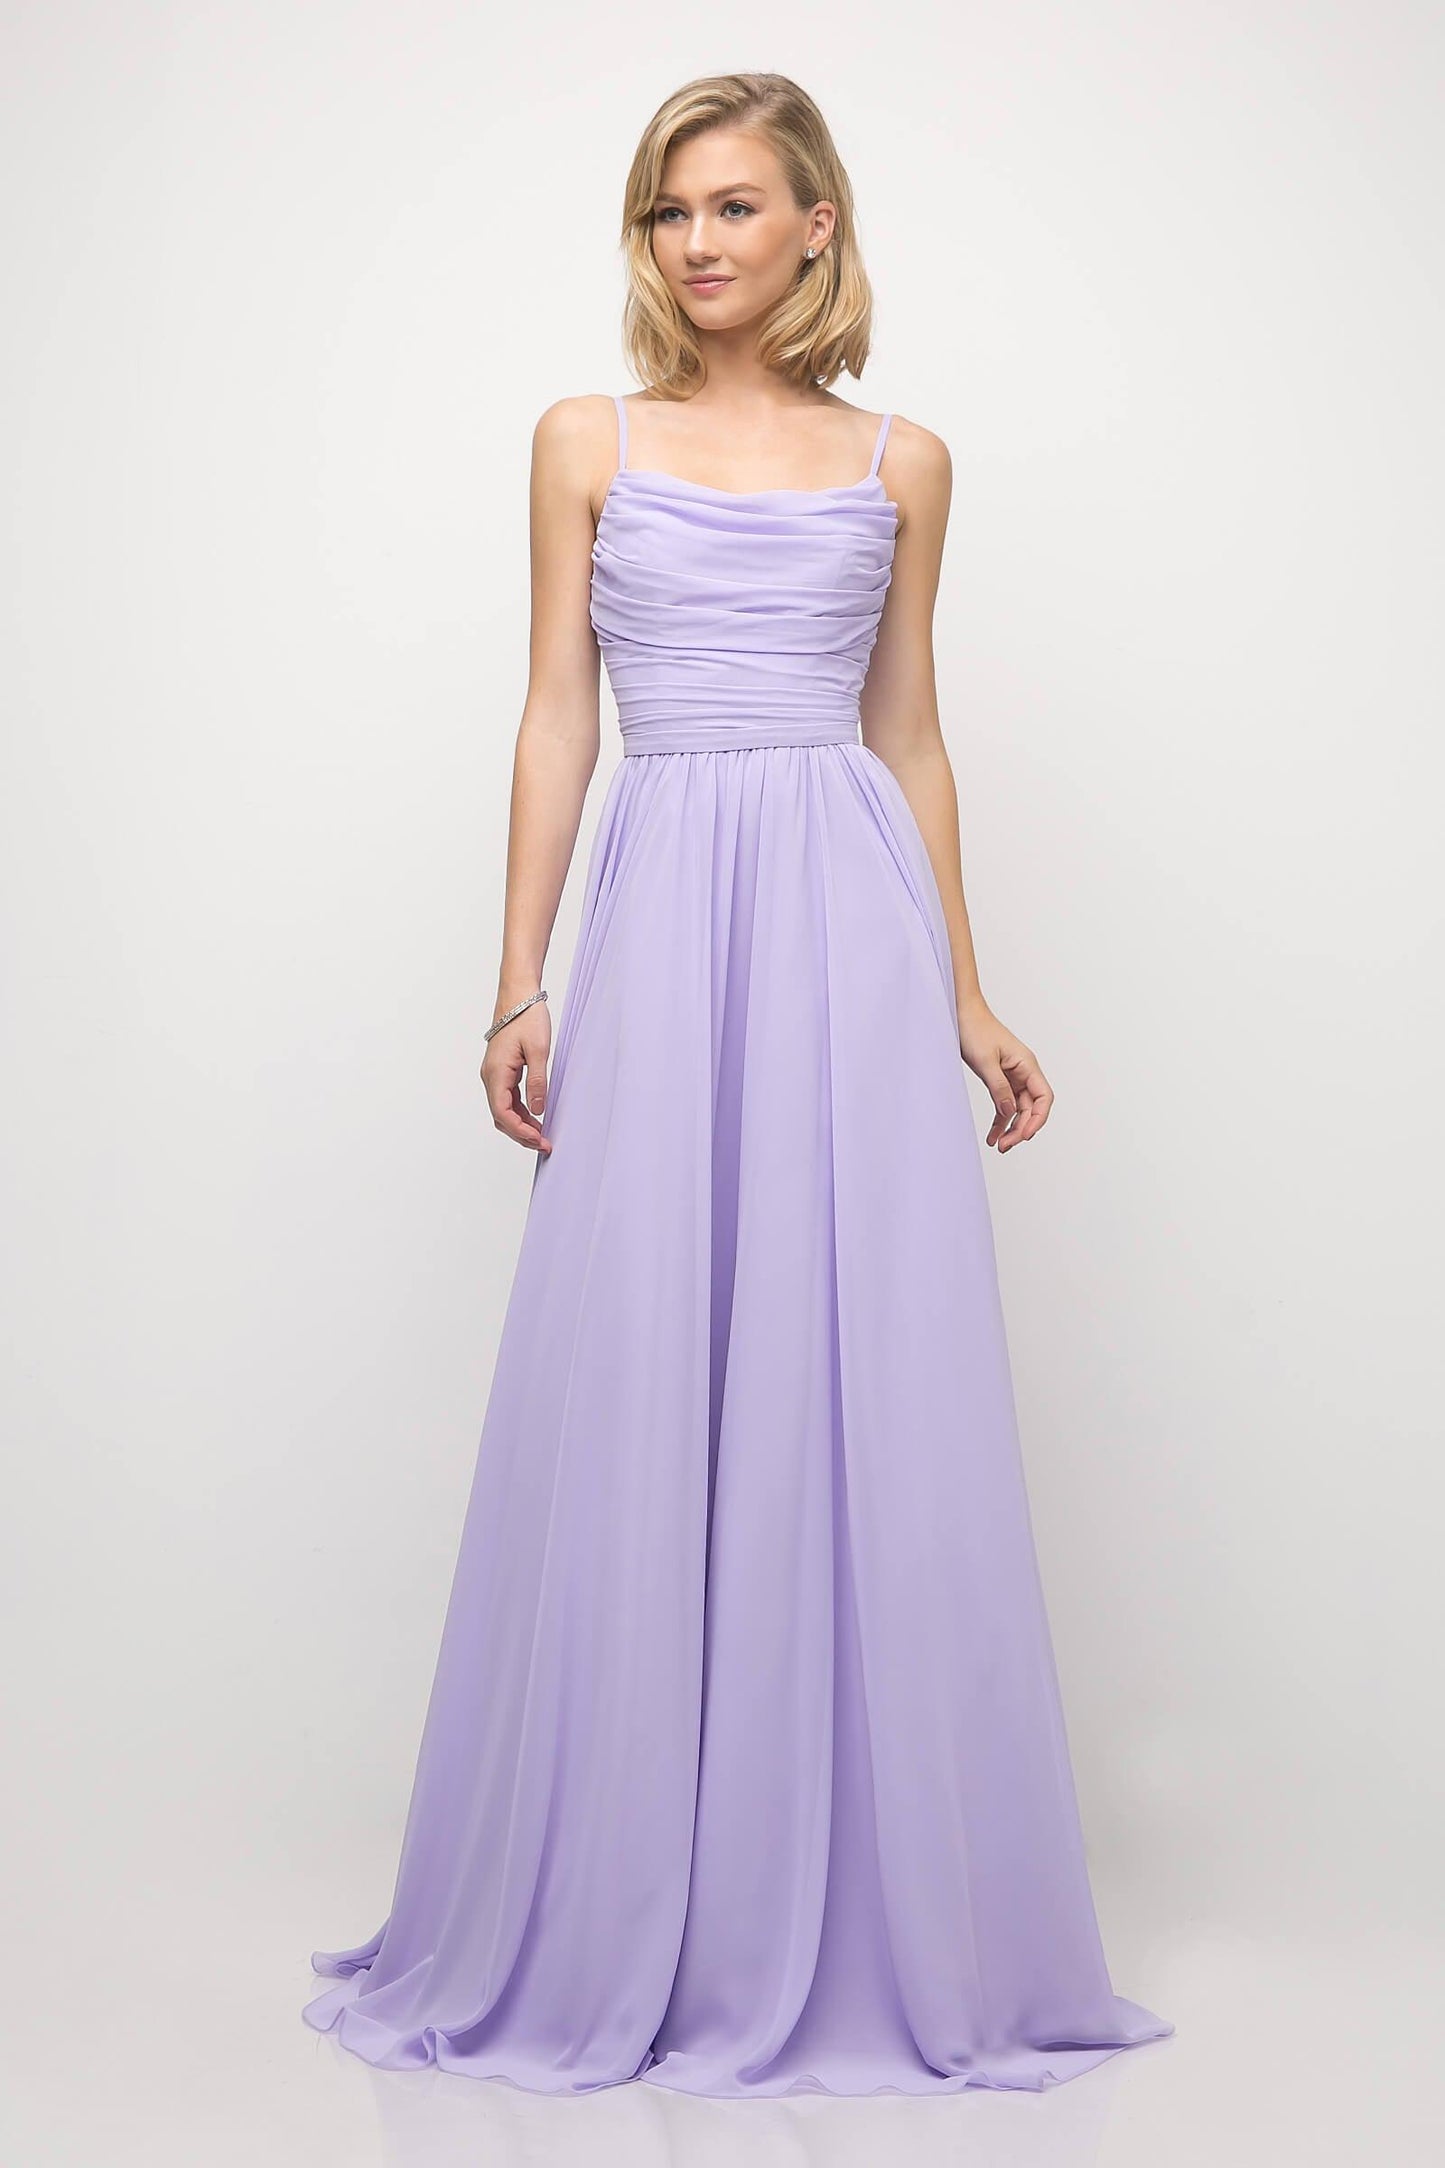 Long Formal Sleeveless Chiffon Prom Gown - The Dress Outlet Cinderella Divine